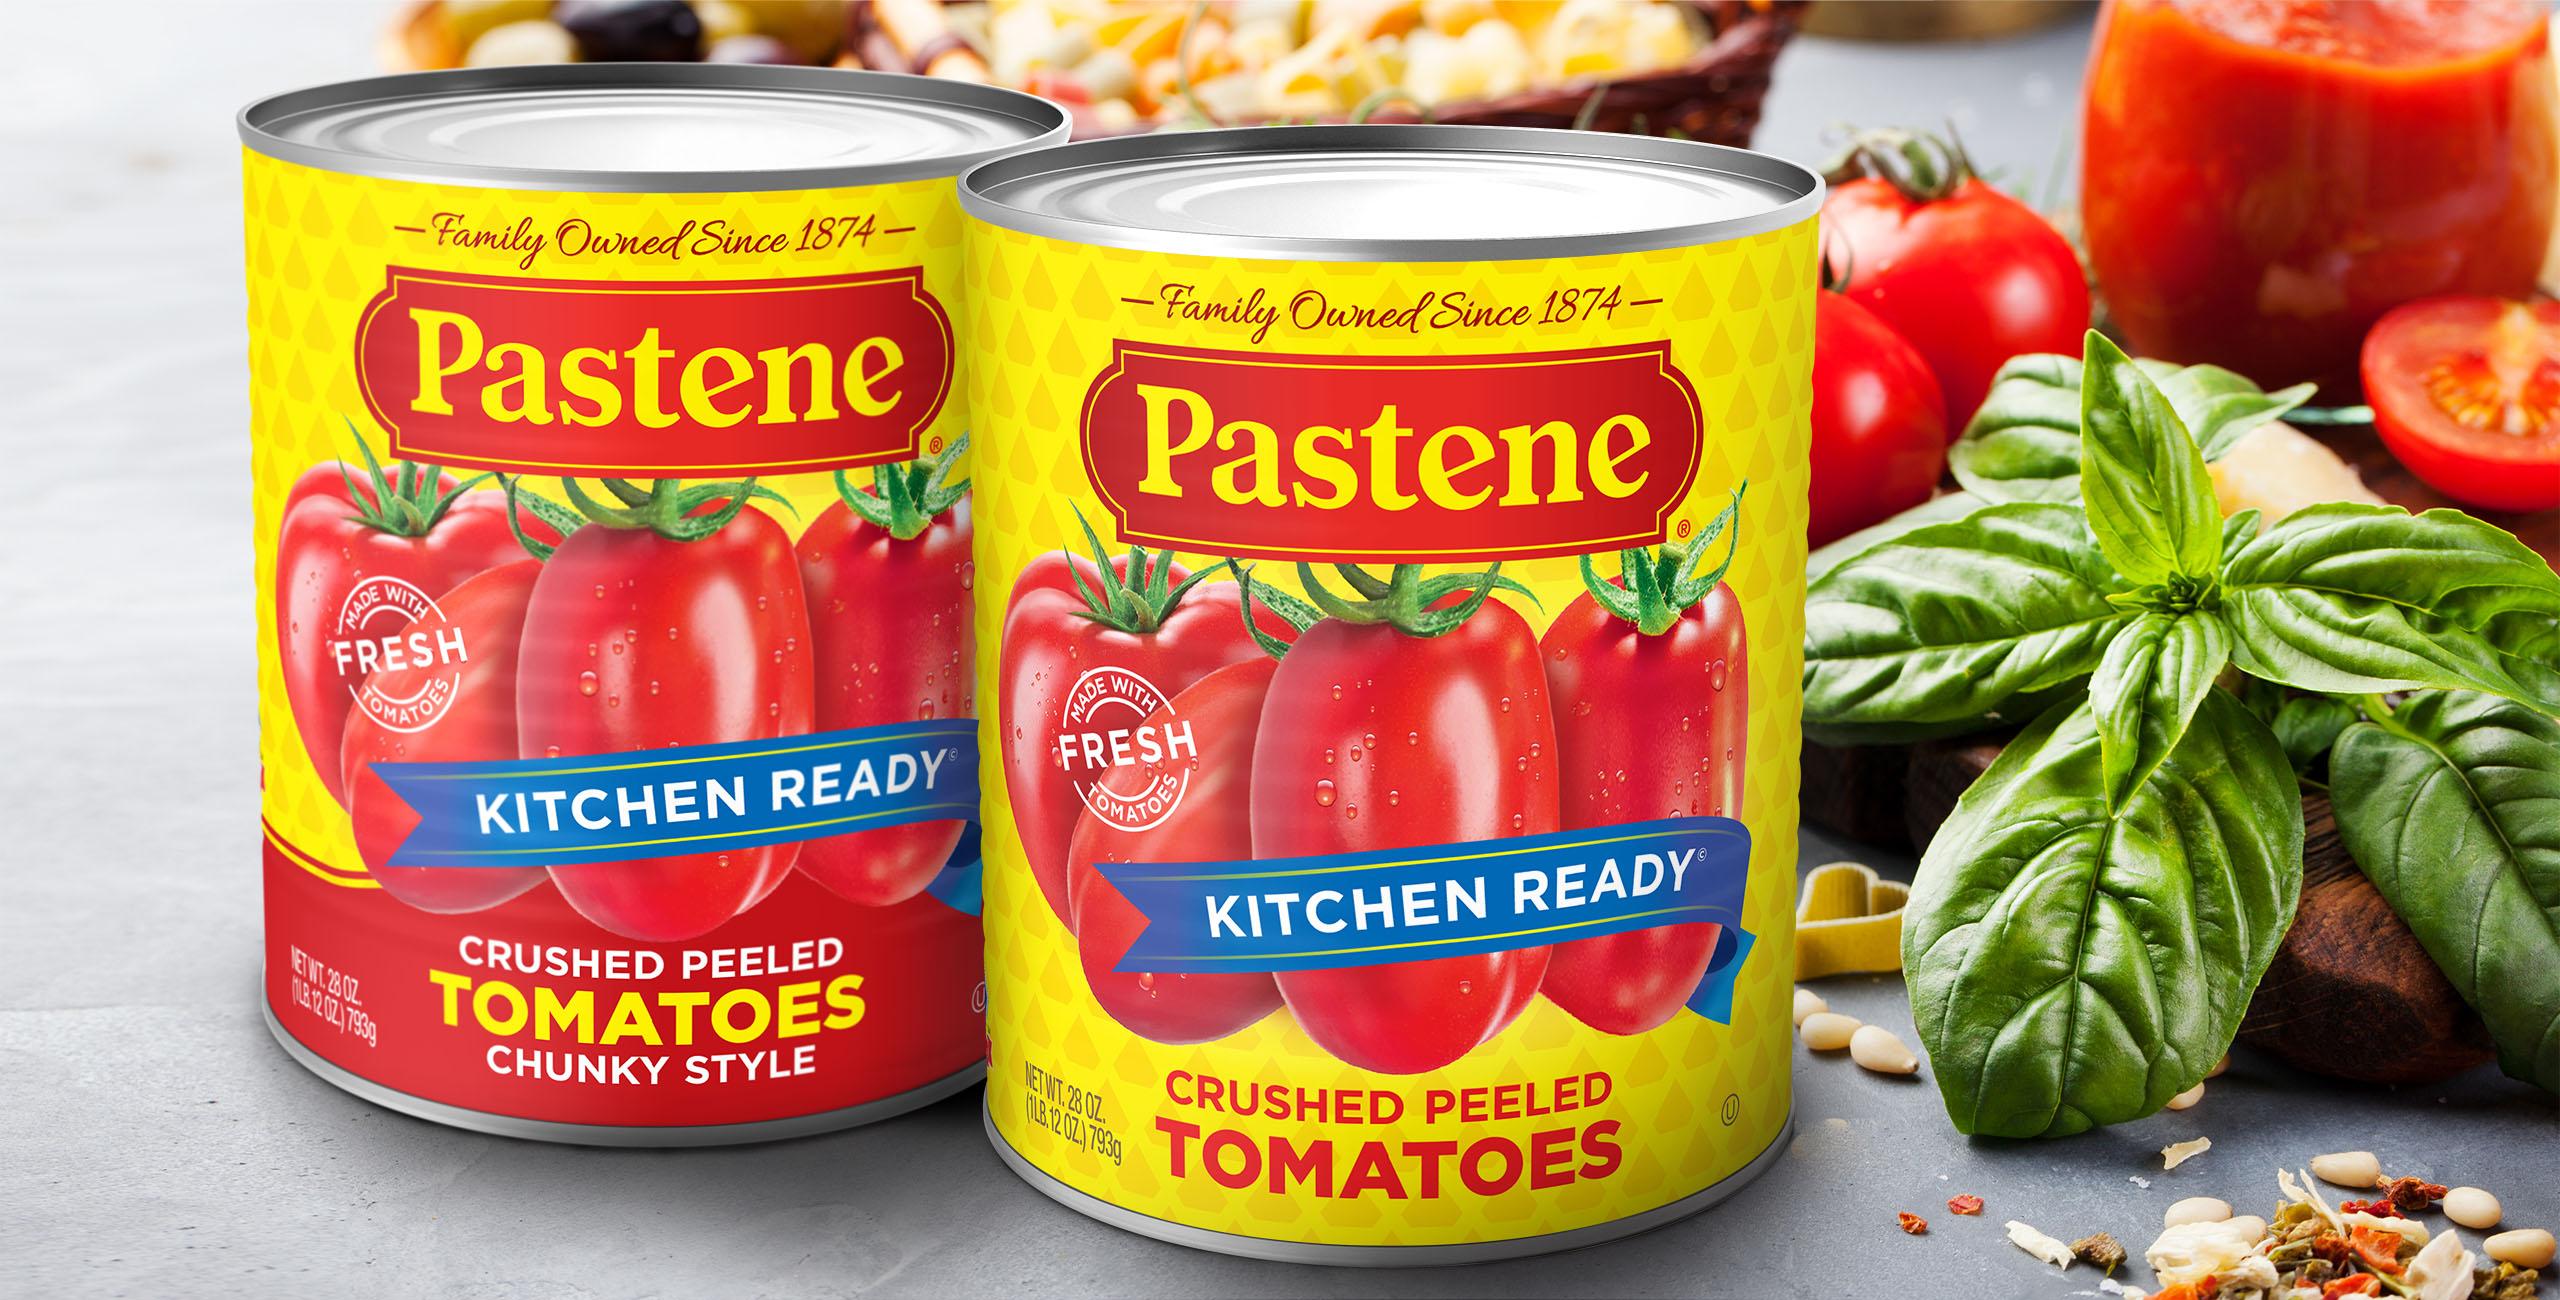 Pastene Kitchen Ready Tomatoes cans